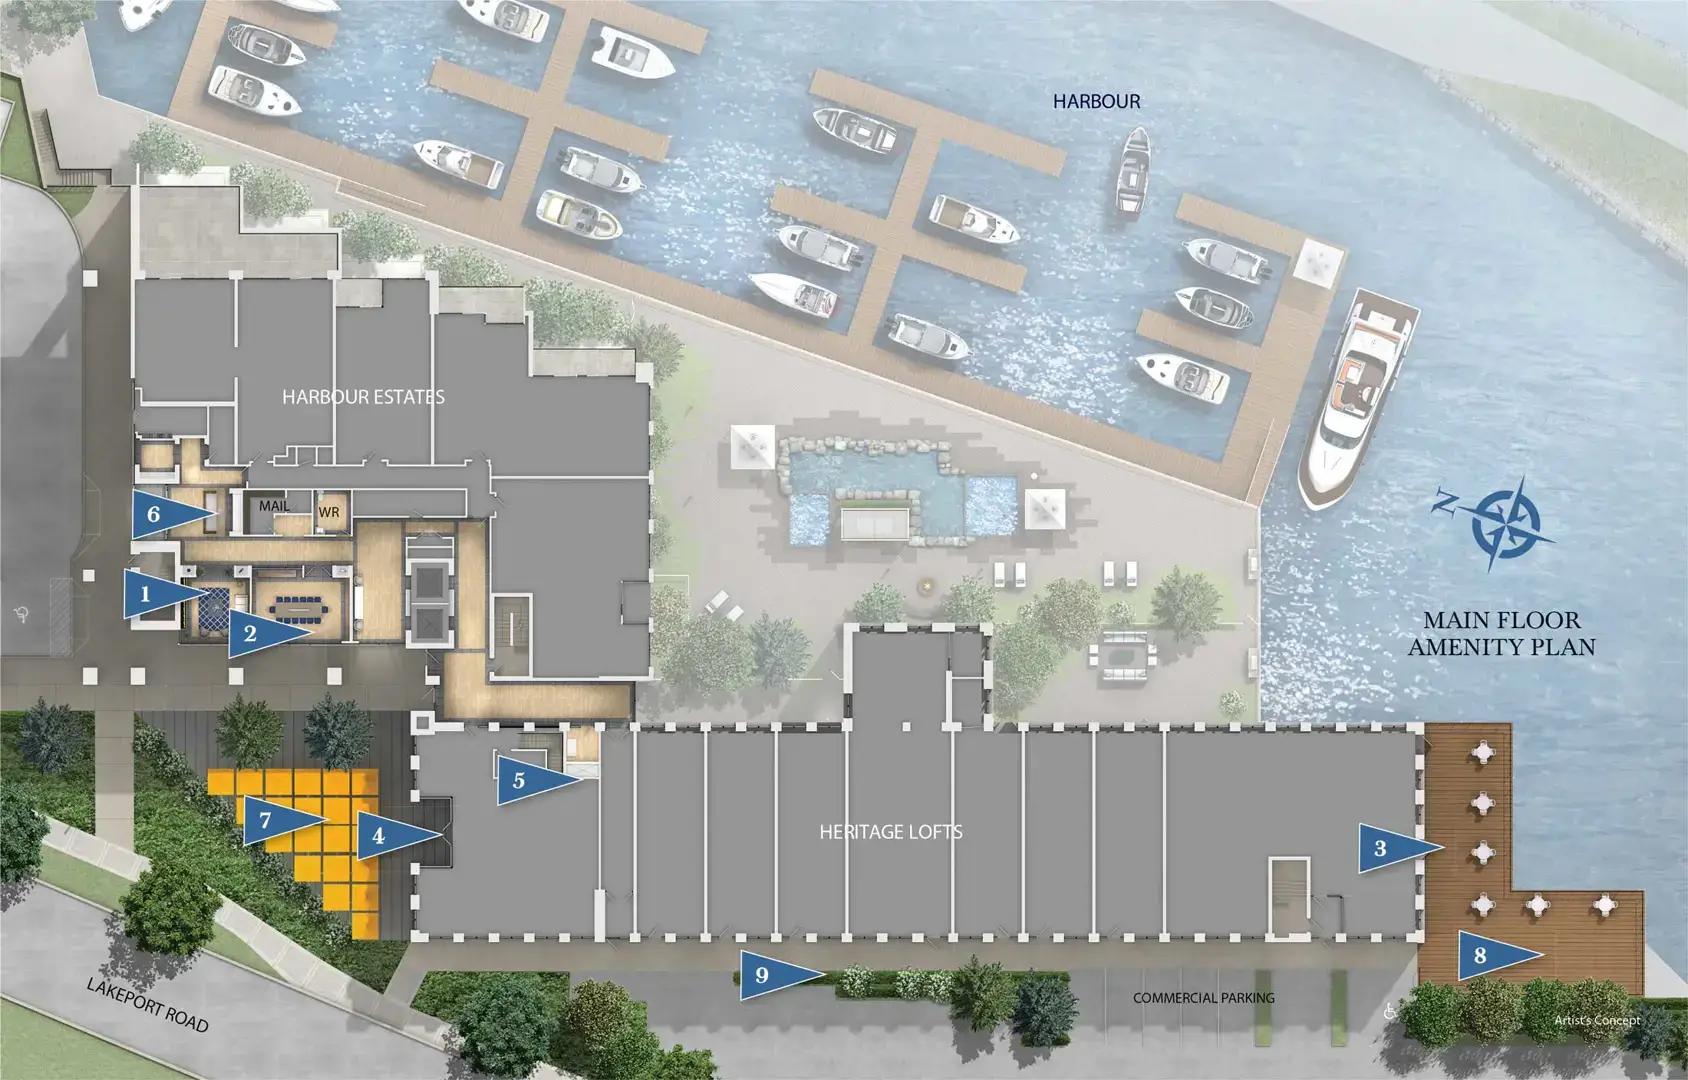 The Harbour Club amenity plan